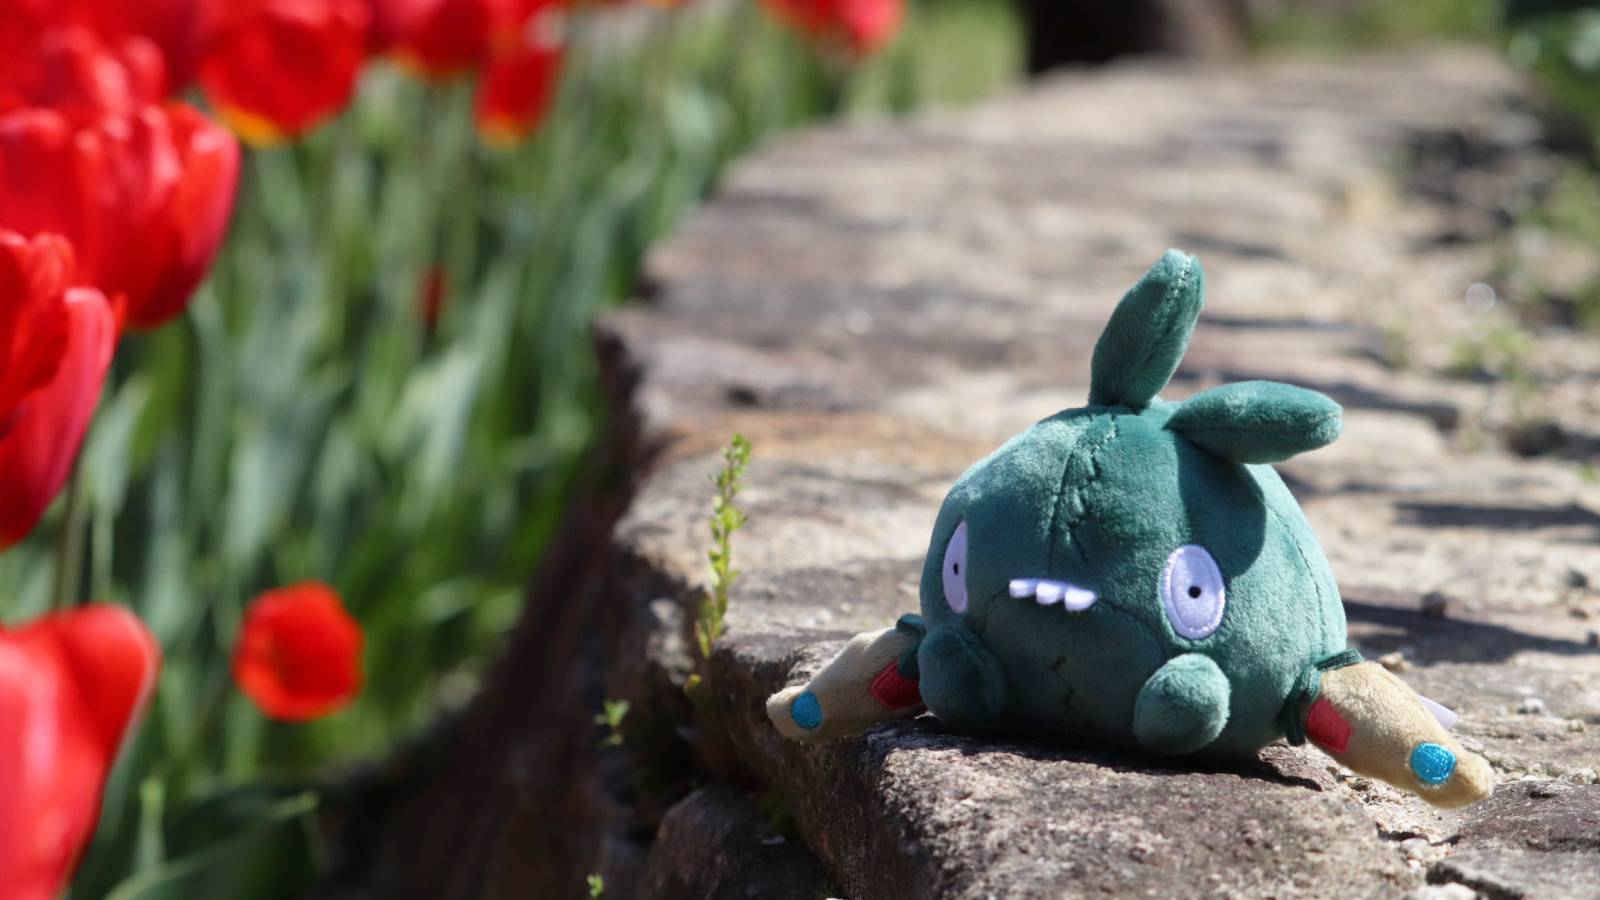 A photography shows a Trubbish plush sat outdoors